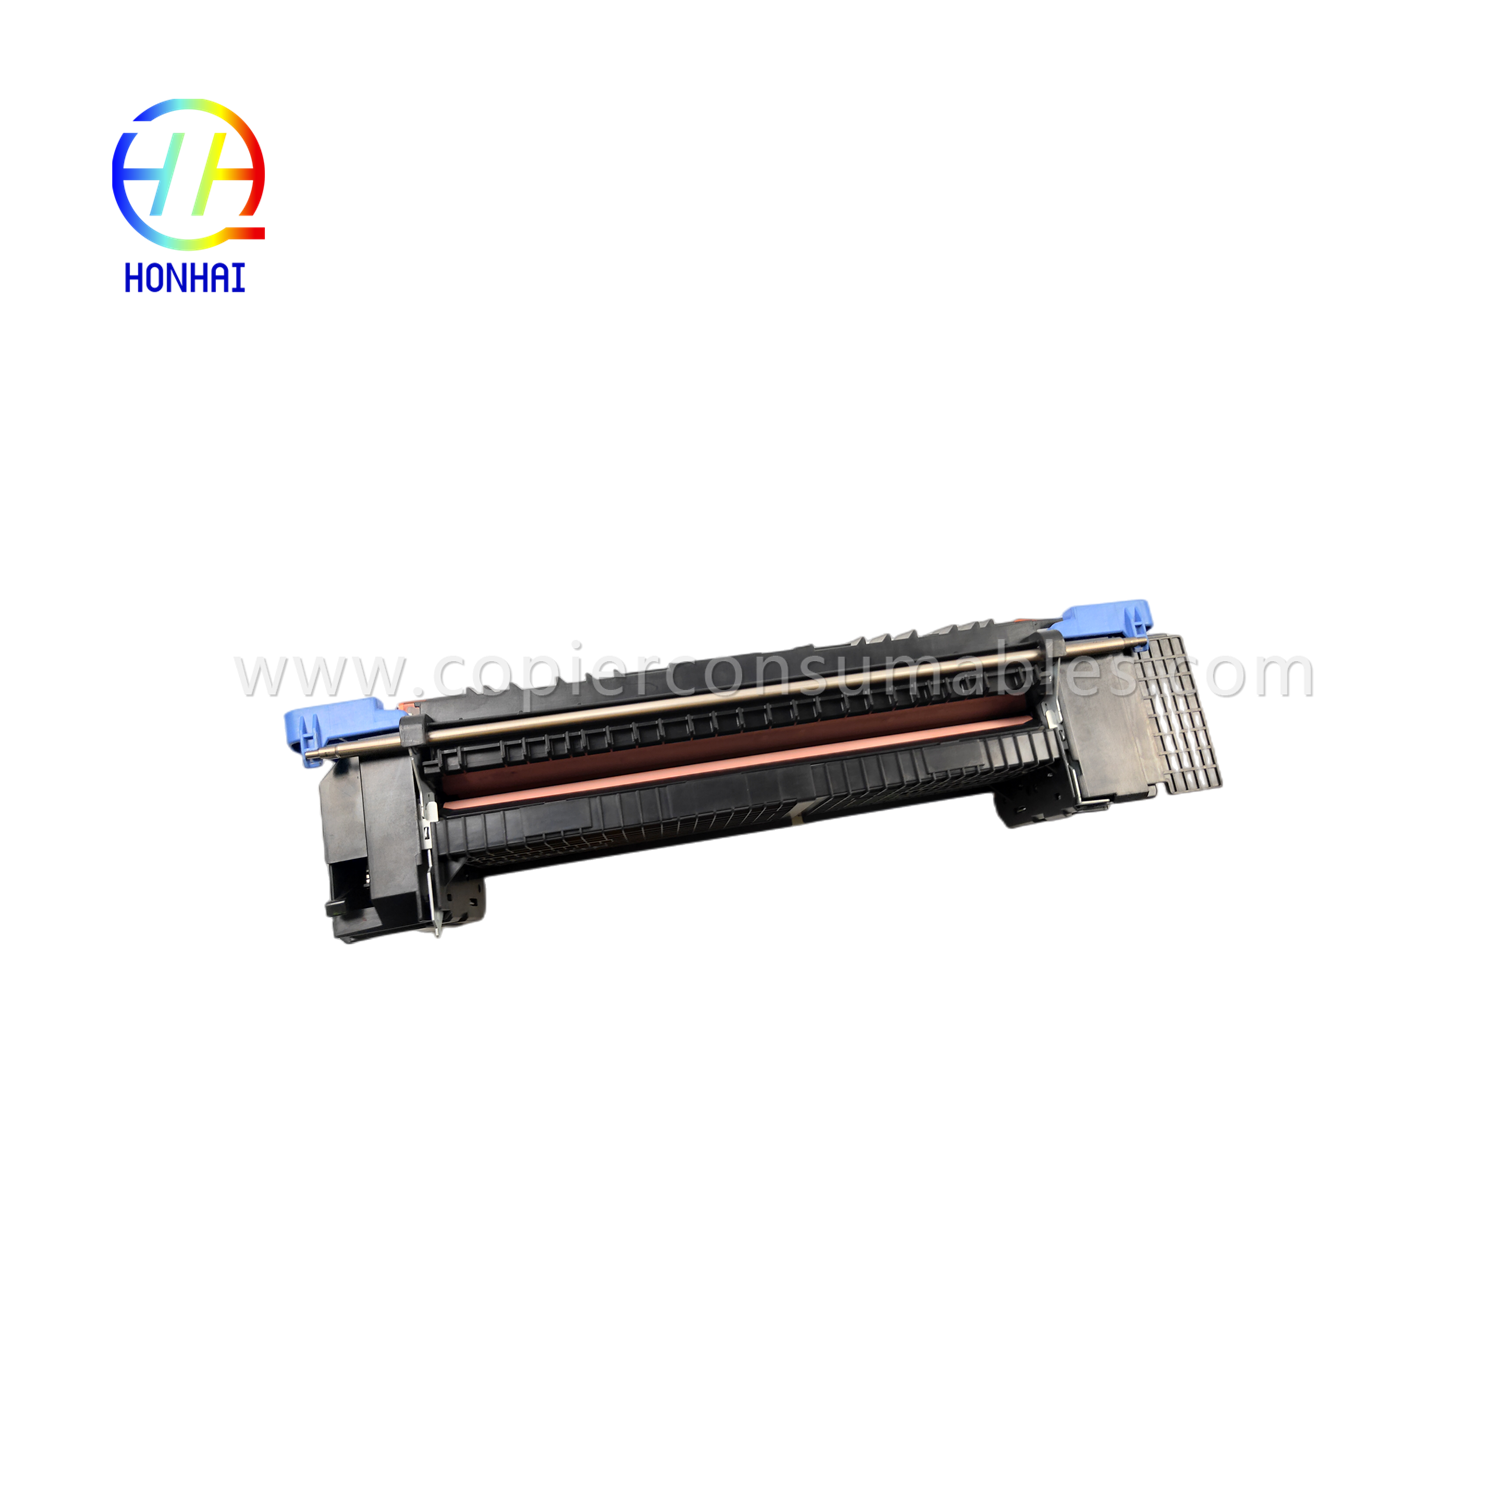 https://www.copierconsumables.com/fuser-assembly-unit-for-hp-m855-m880-m855dn-m855xh-m880z-m880z-c1n54-67901-c1n58-67901-fusing-heating-fixing-assy-product/